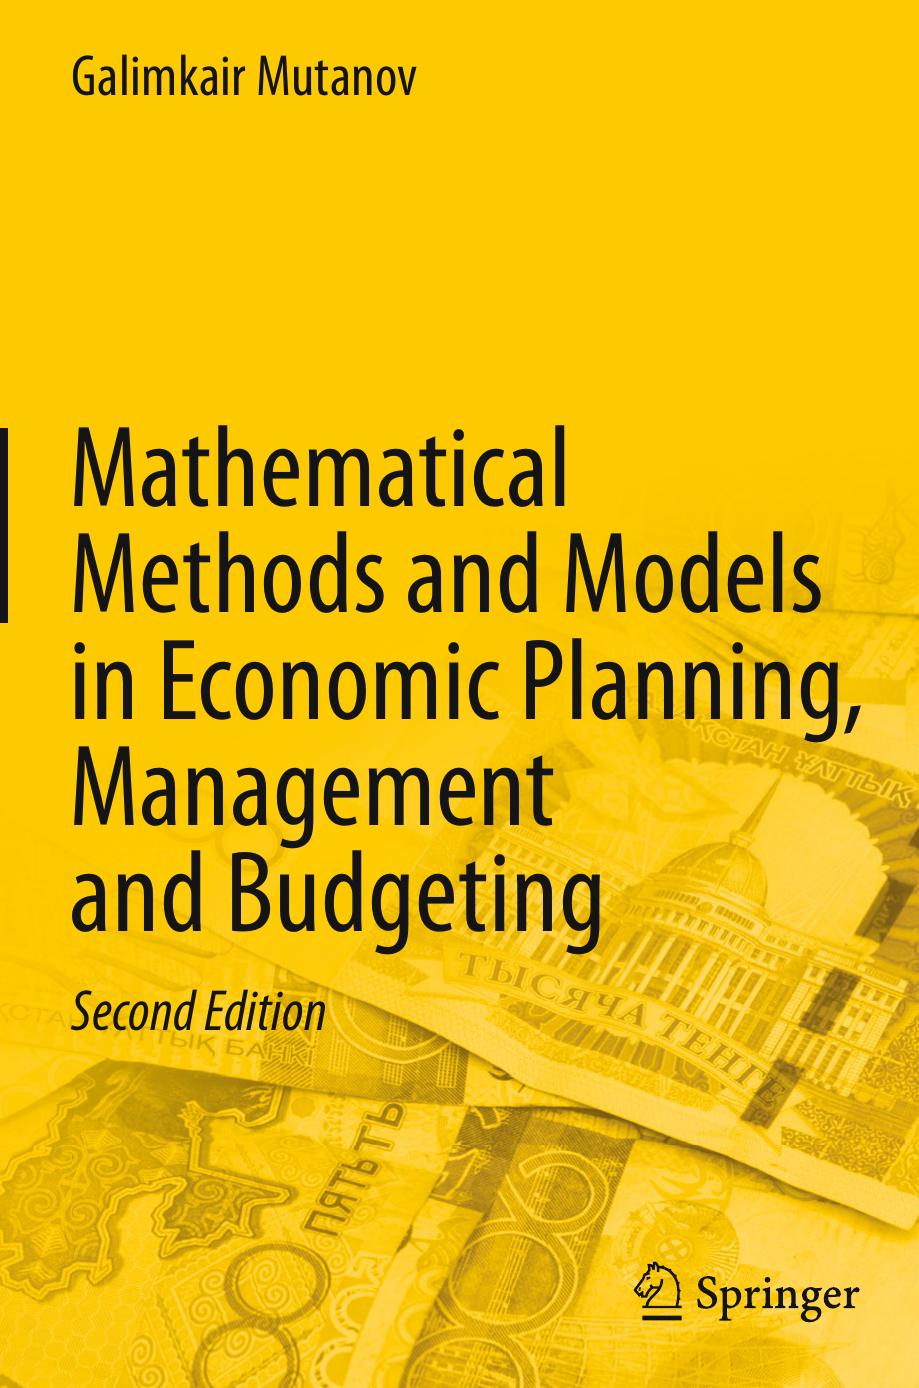 Mathematical Methods and Models in Economic Planning, Management and Budgeting 2015